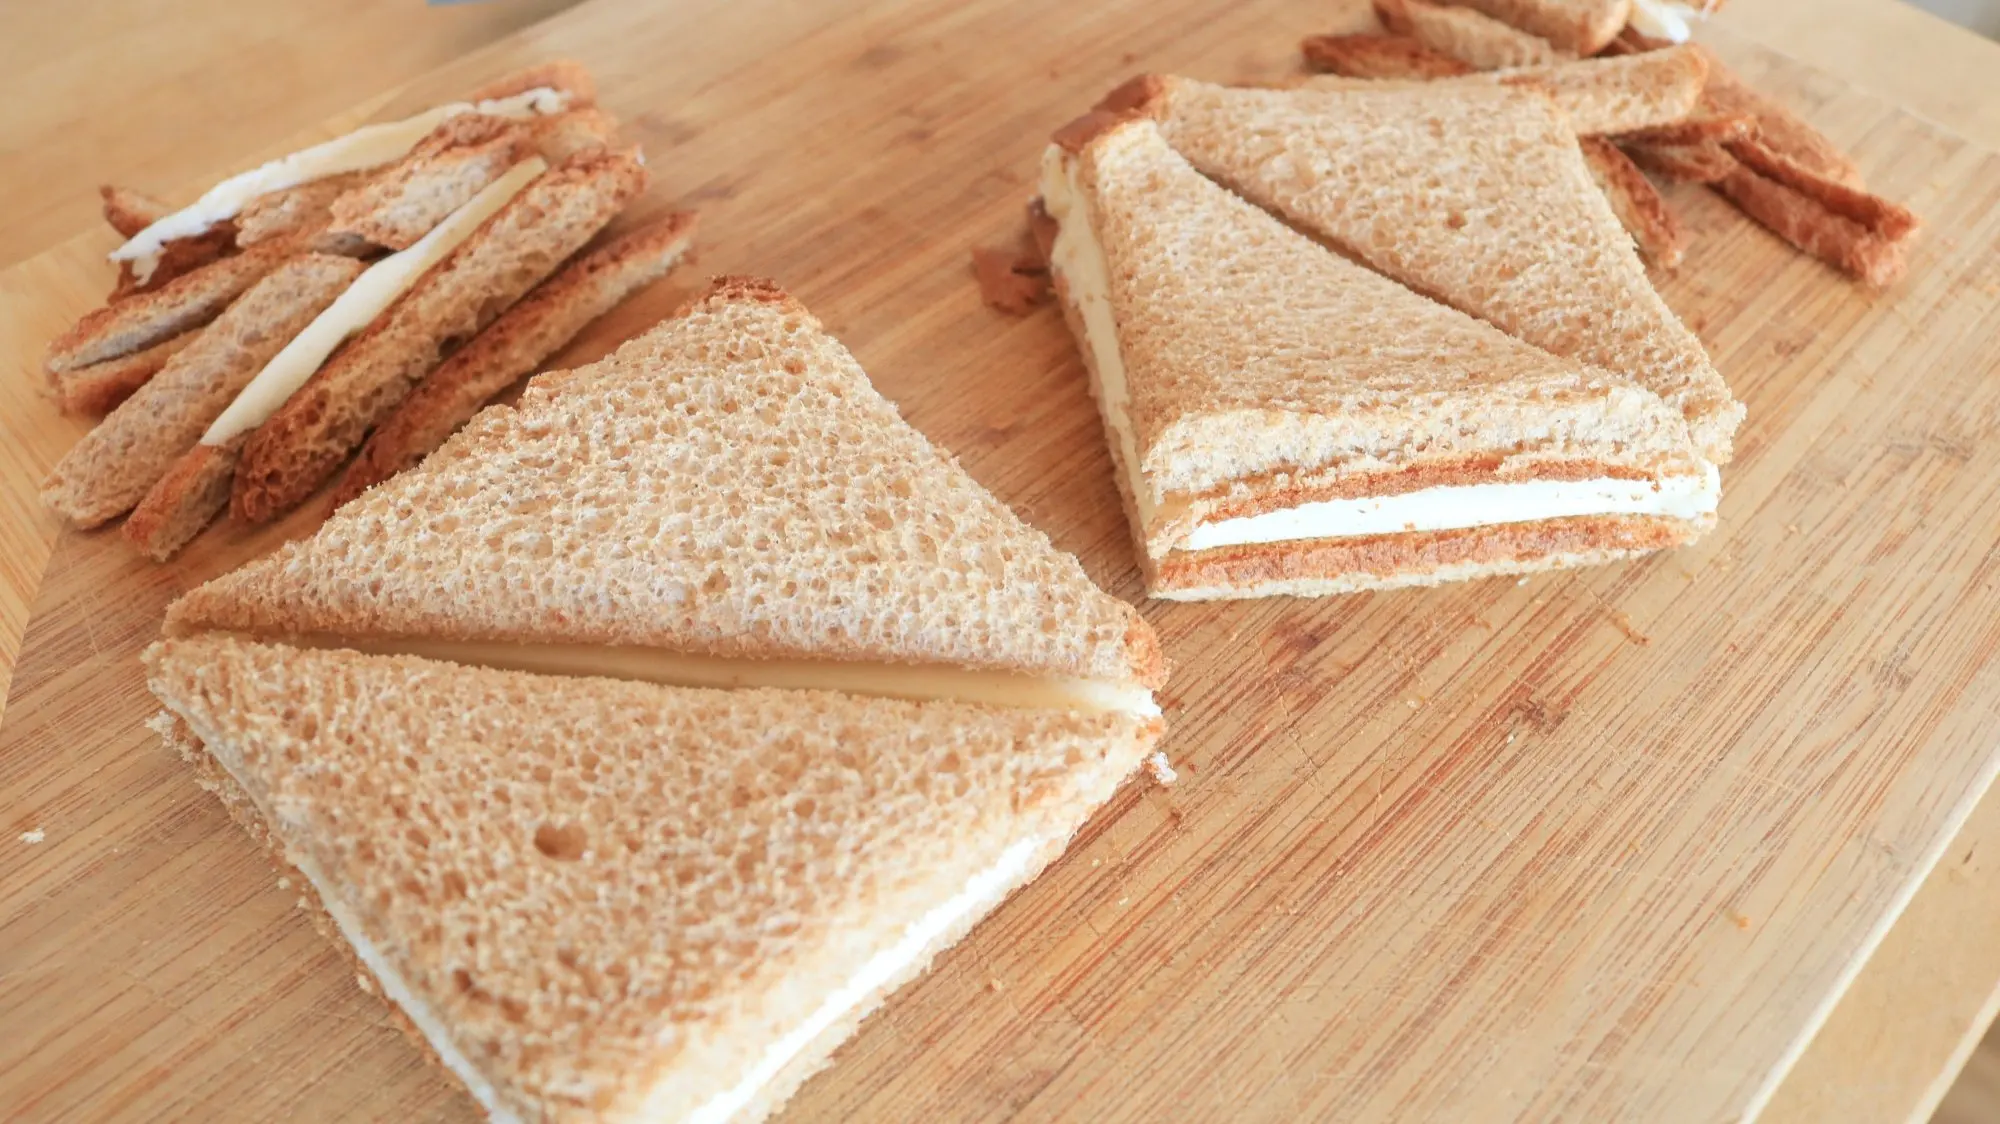 Two cheese sandwiches with crusts trimmed off.